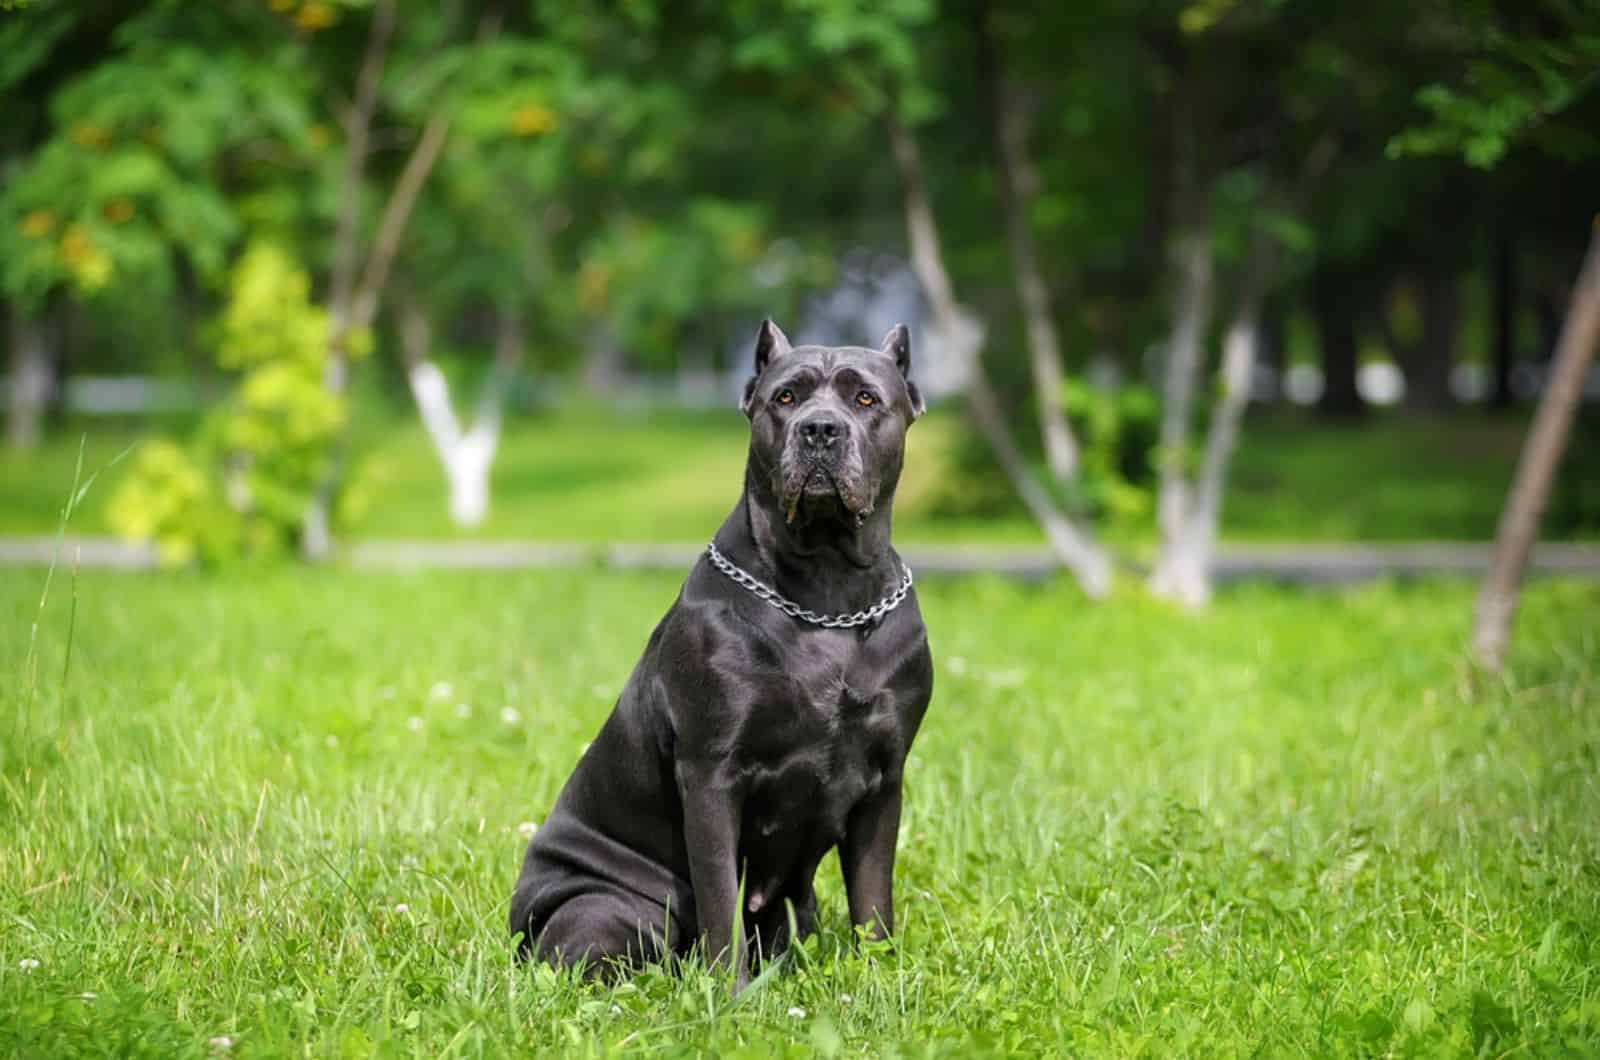 cane corso in the Park on the green lawn